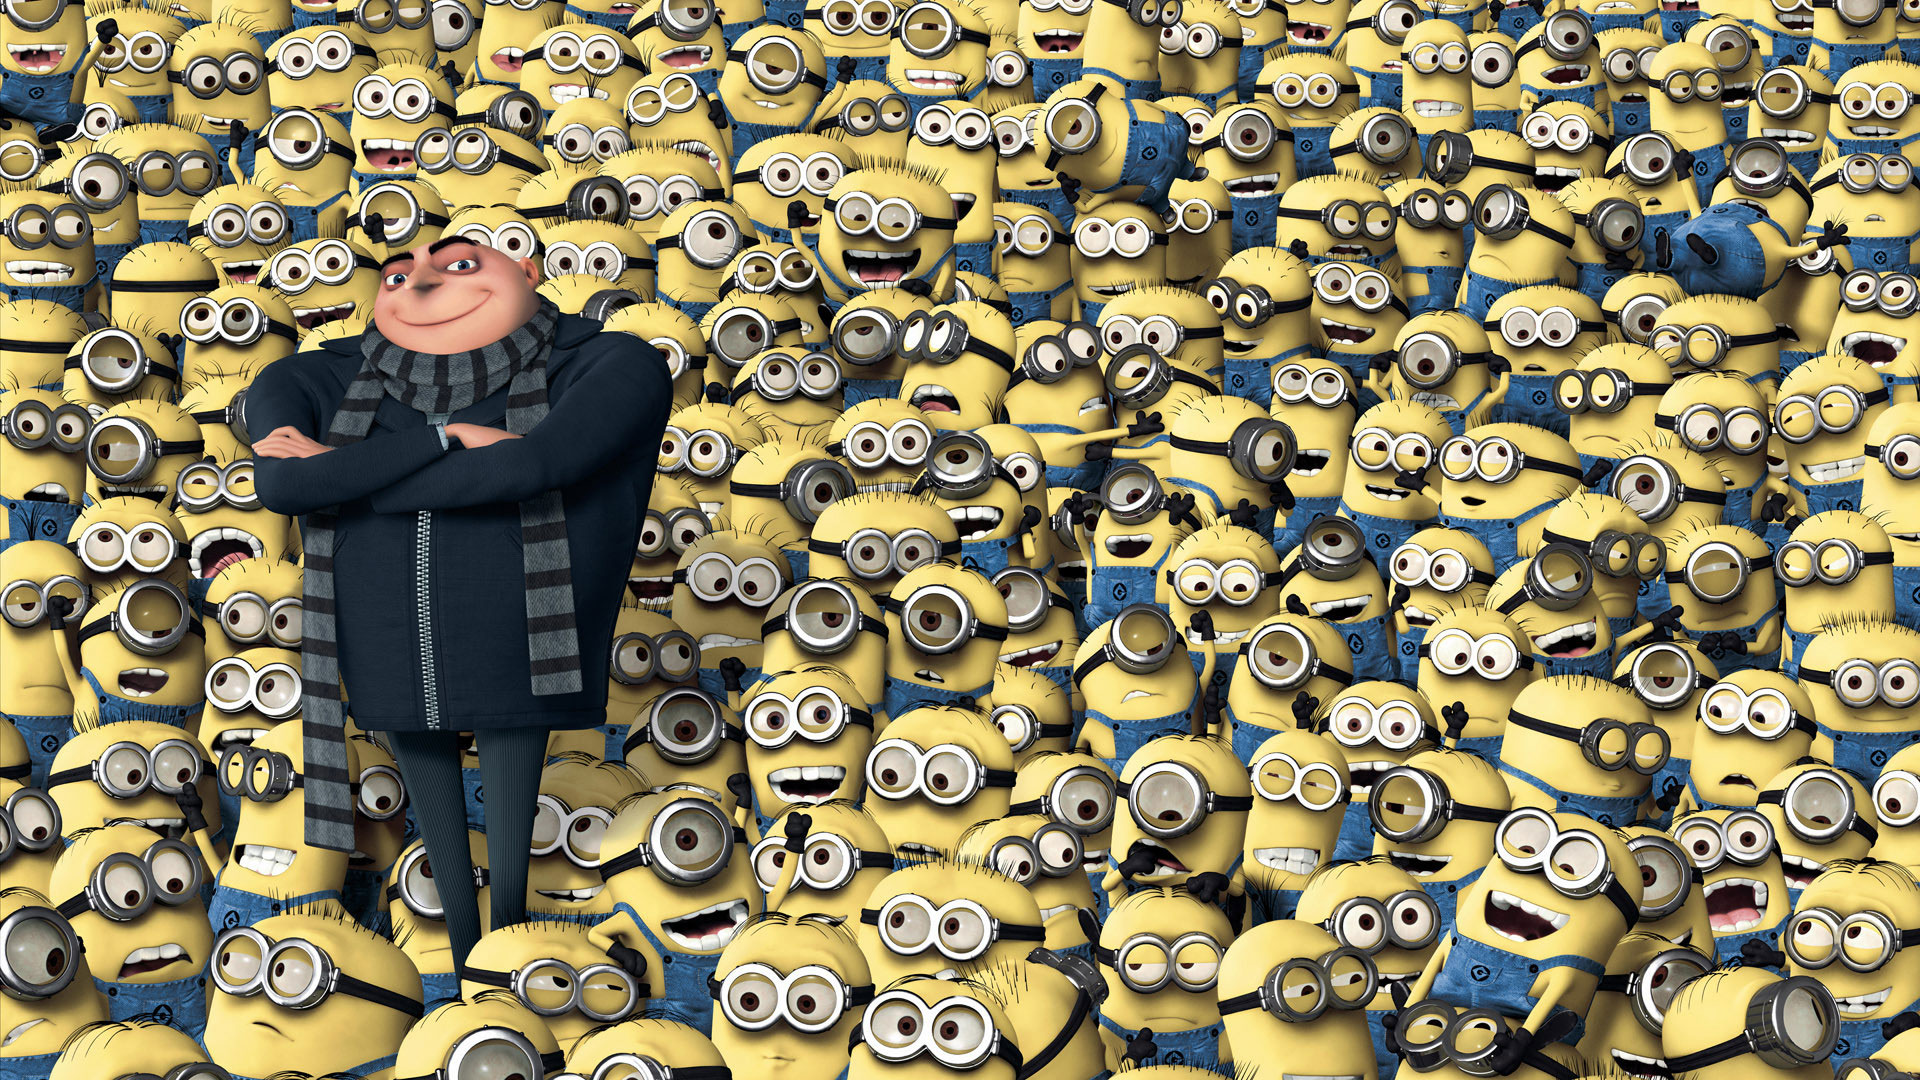 Image - Despicable Me 2 Minions Pictures Wallpaper HD1 1